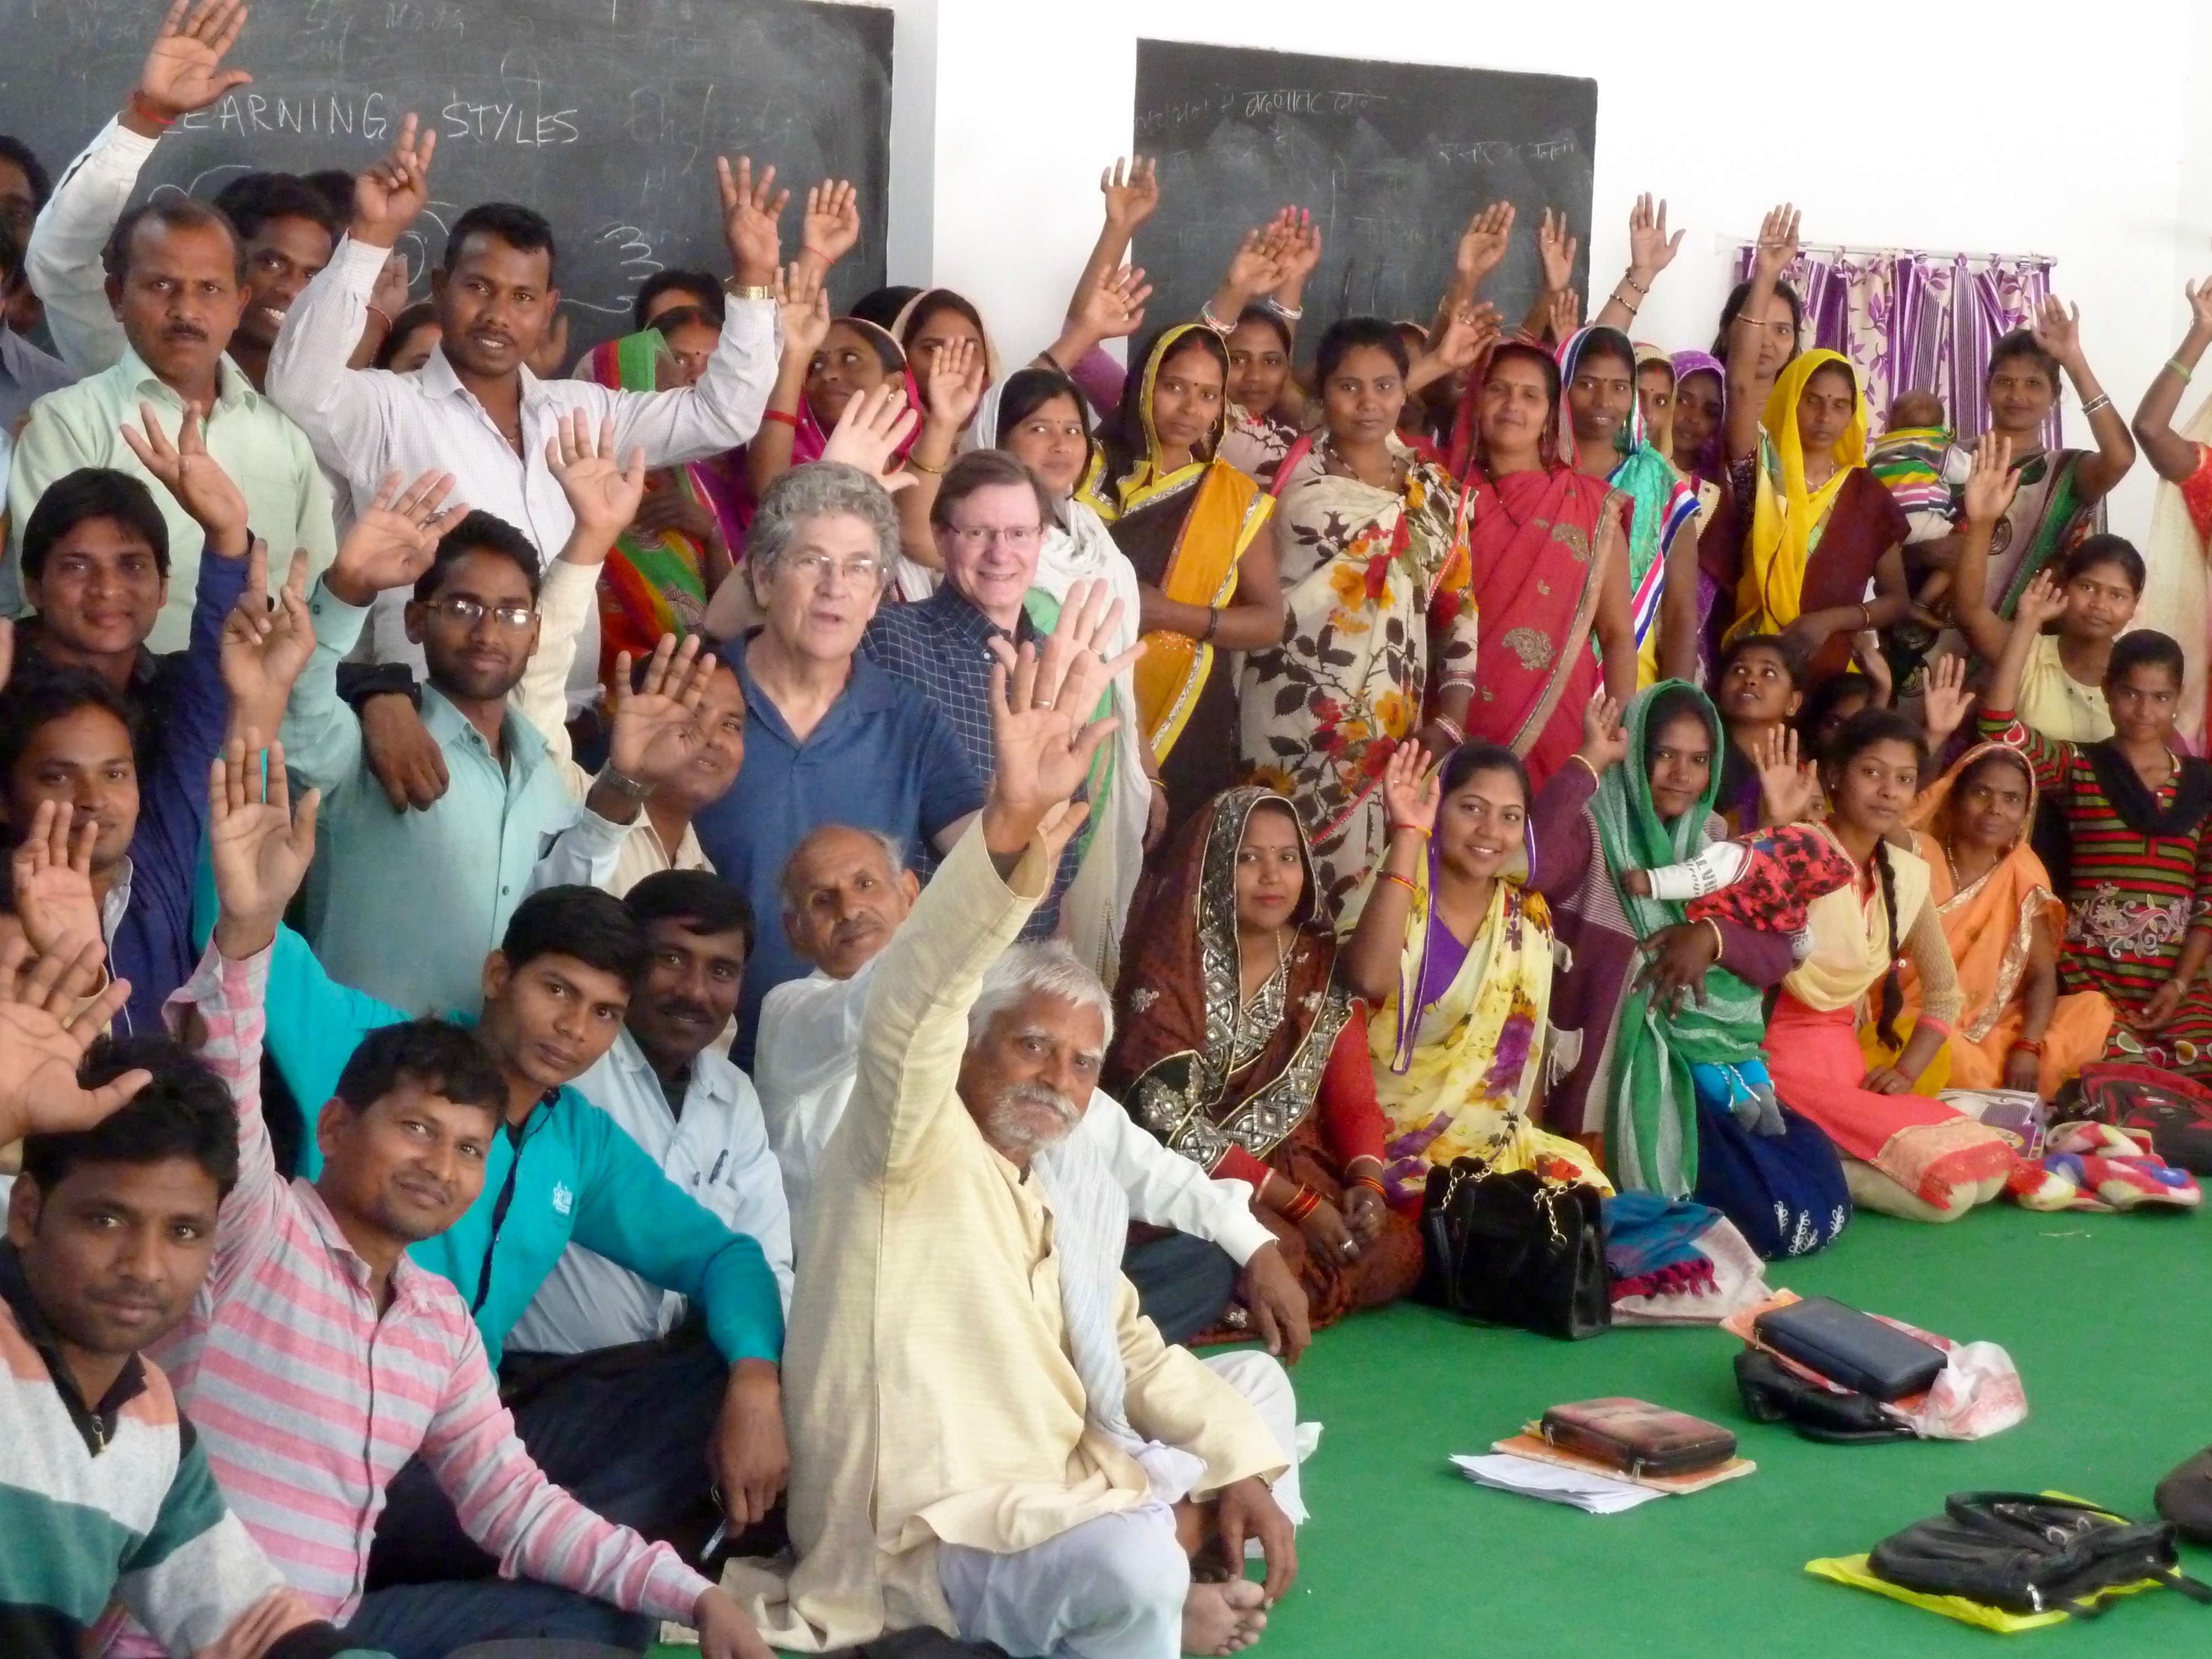 Classroom full of people seated and standing, many wearing saris, each raising a hand.